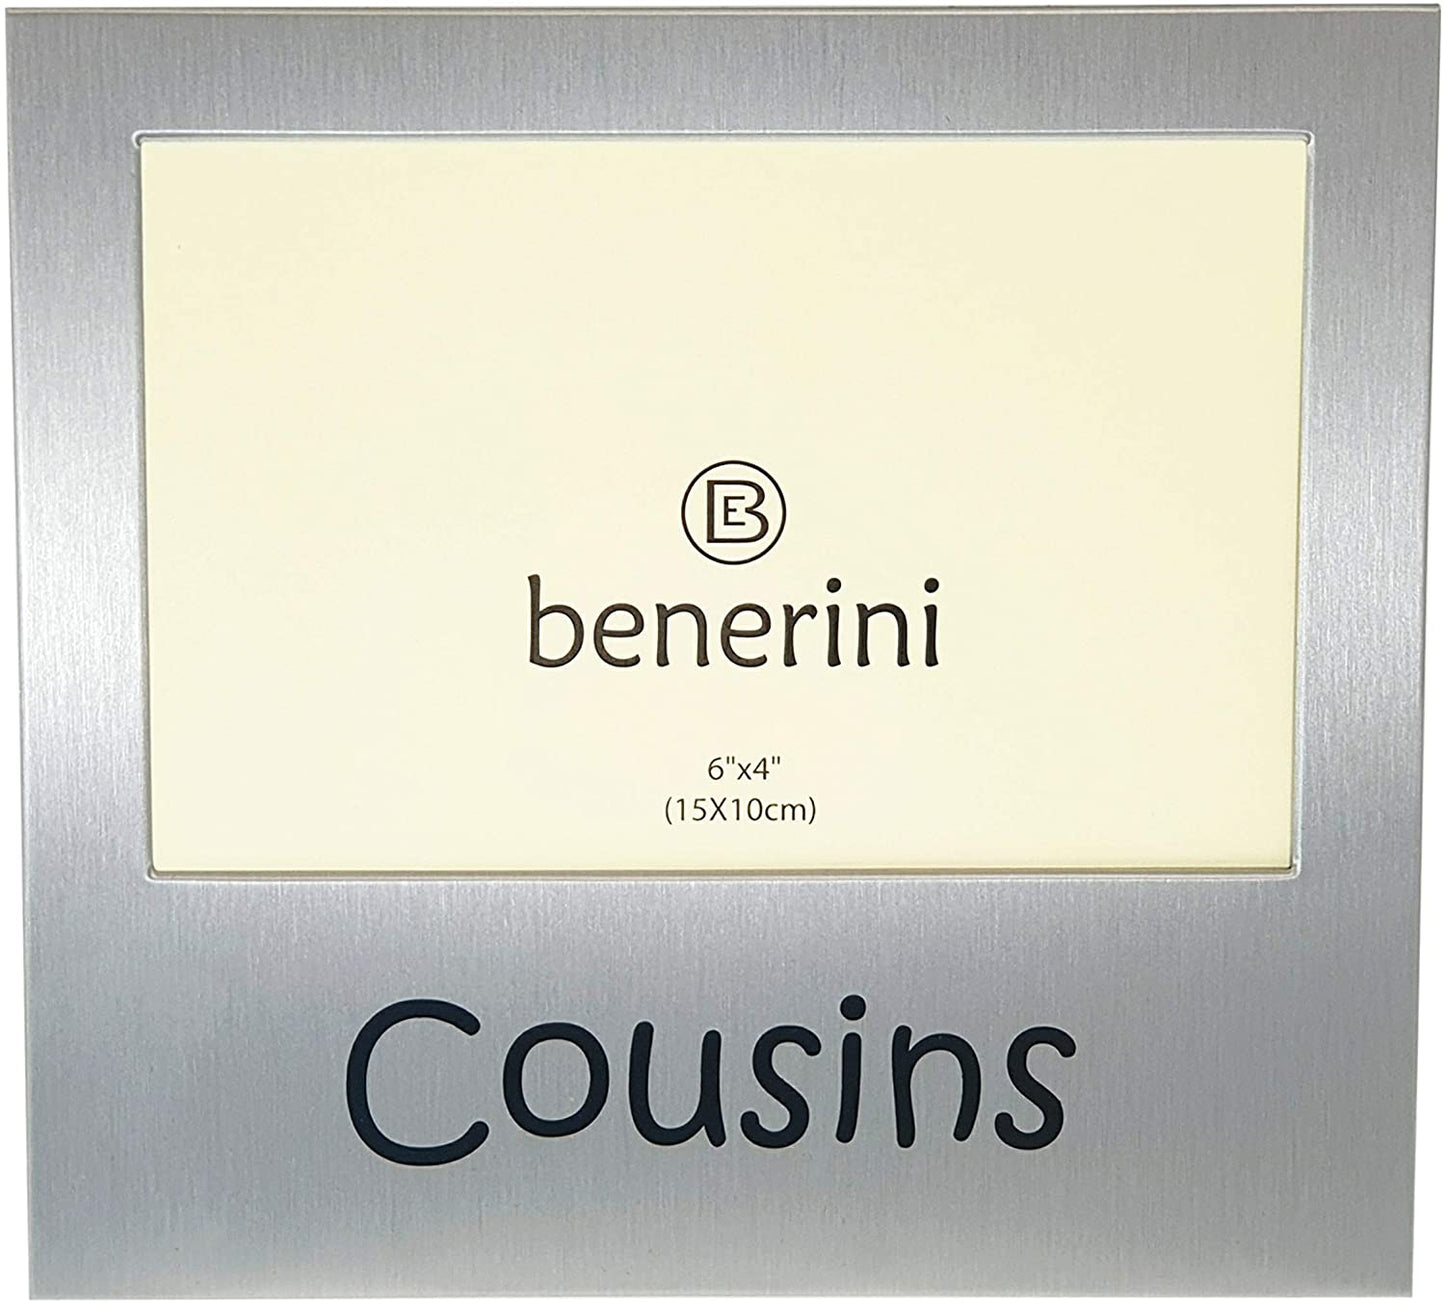 benerini ' Cousins ' - Photo Picture Frame Gift - Will take a Photo of 6 x 4 Inches (15 x 10 cm) - (For 8 piece(s))